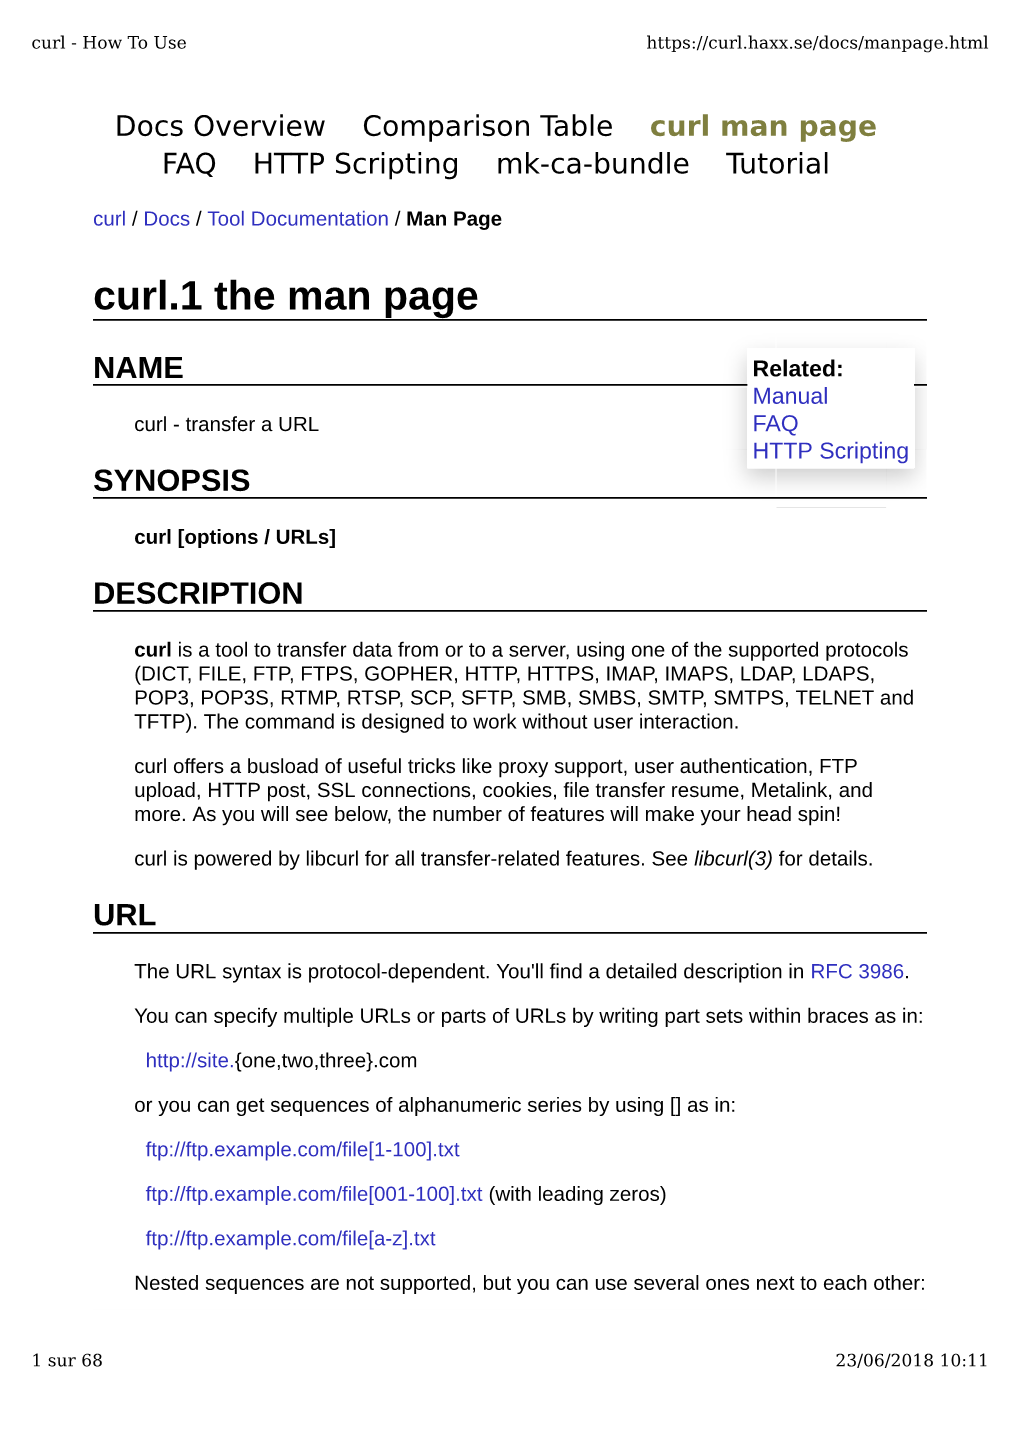 Curl.1 the Man Page